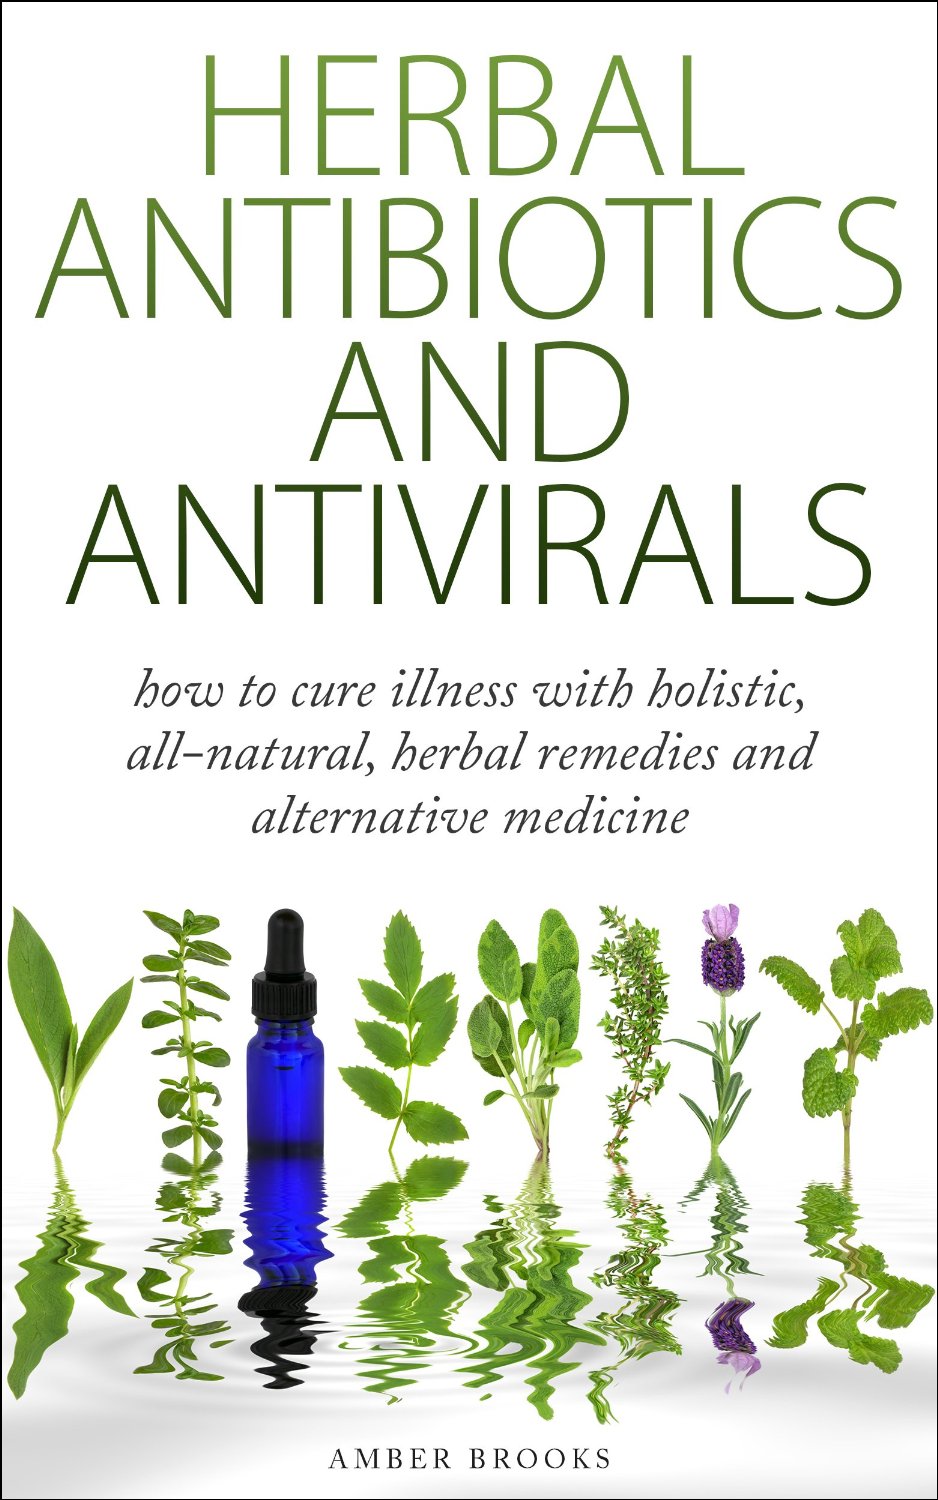 Herbal Antibiotics & Antivirals: How to Cure Illness with Holistic, All Natural, Herbal Medicines and Remedies by Amber Brooks